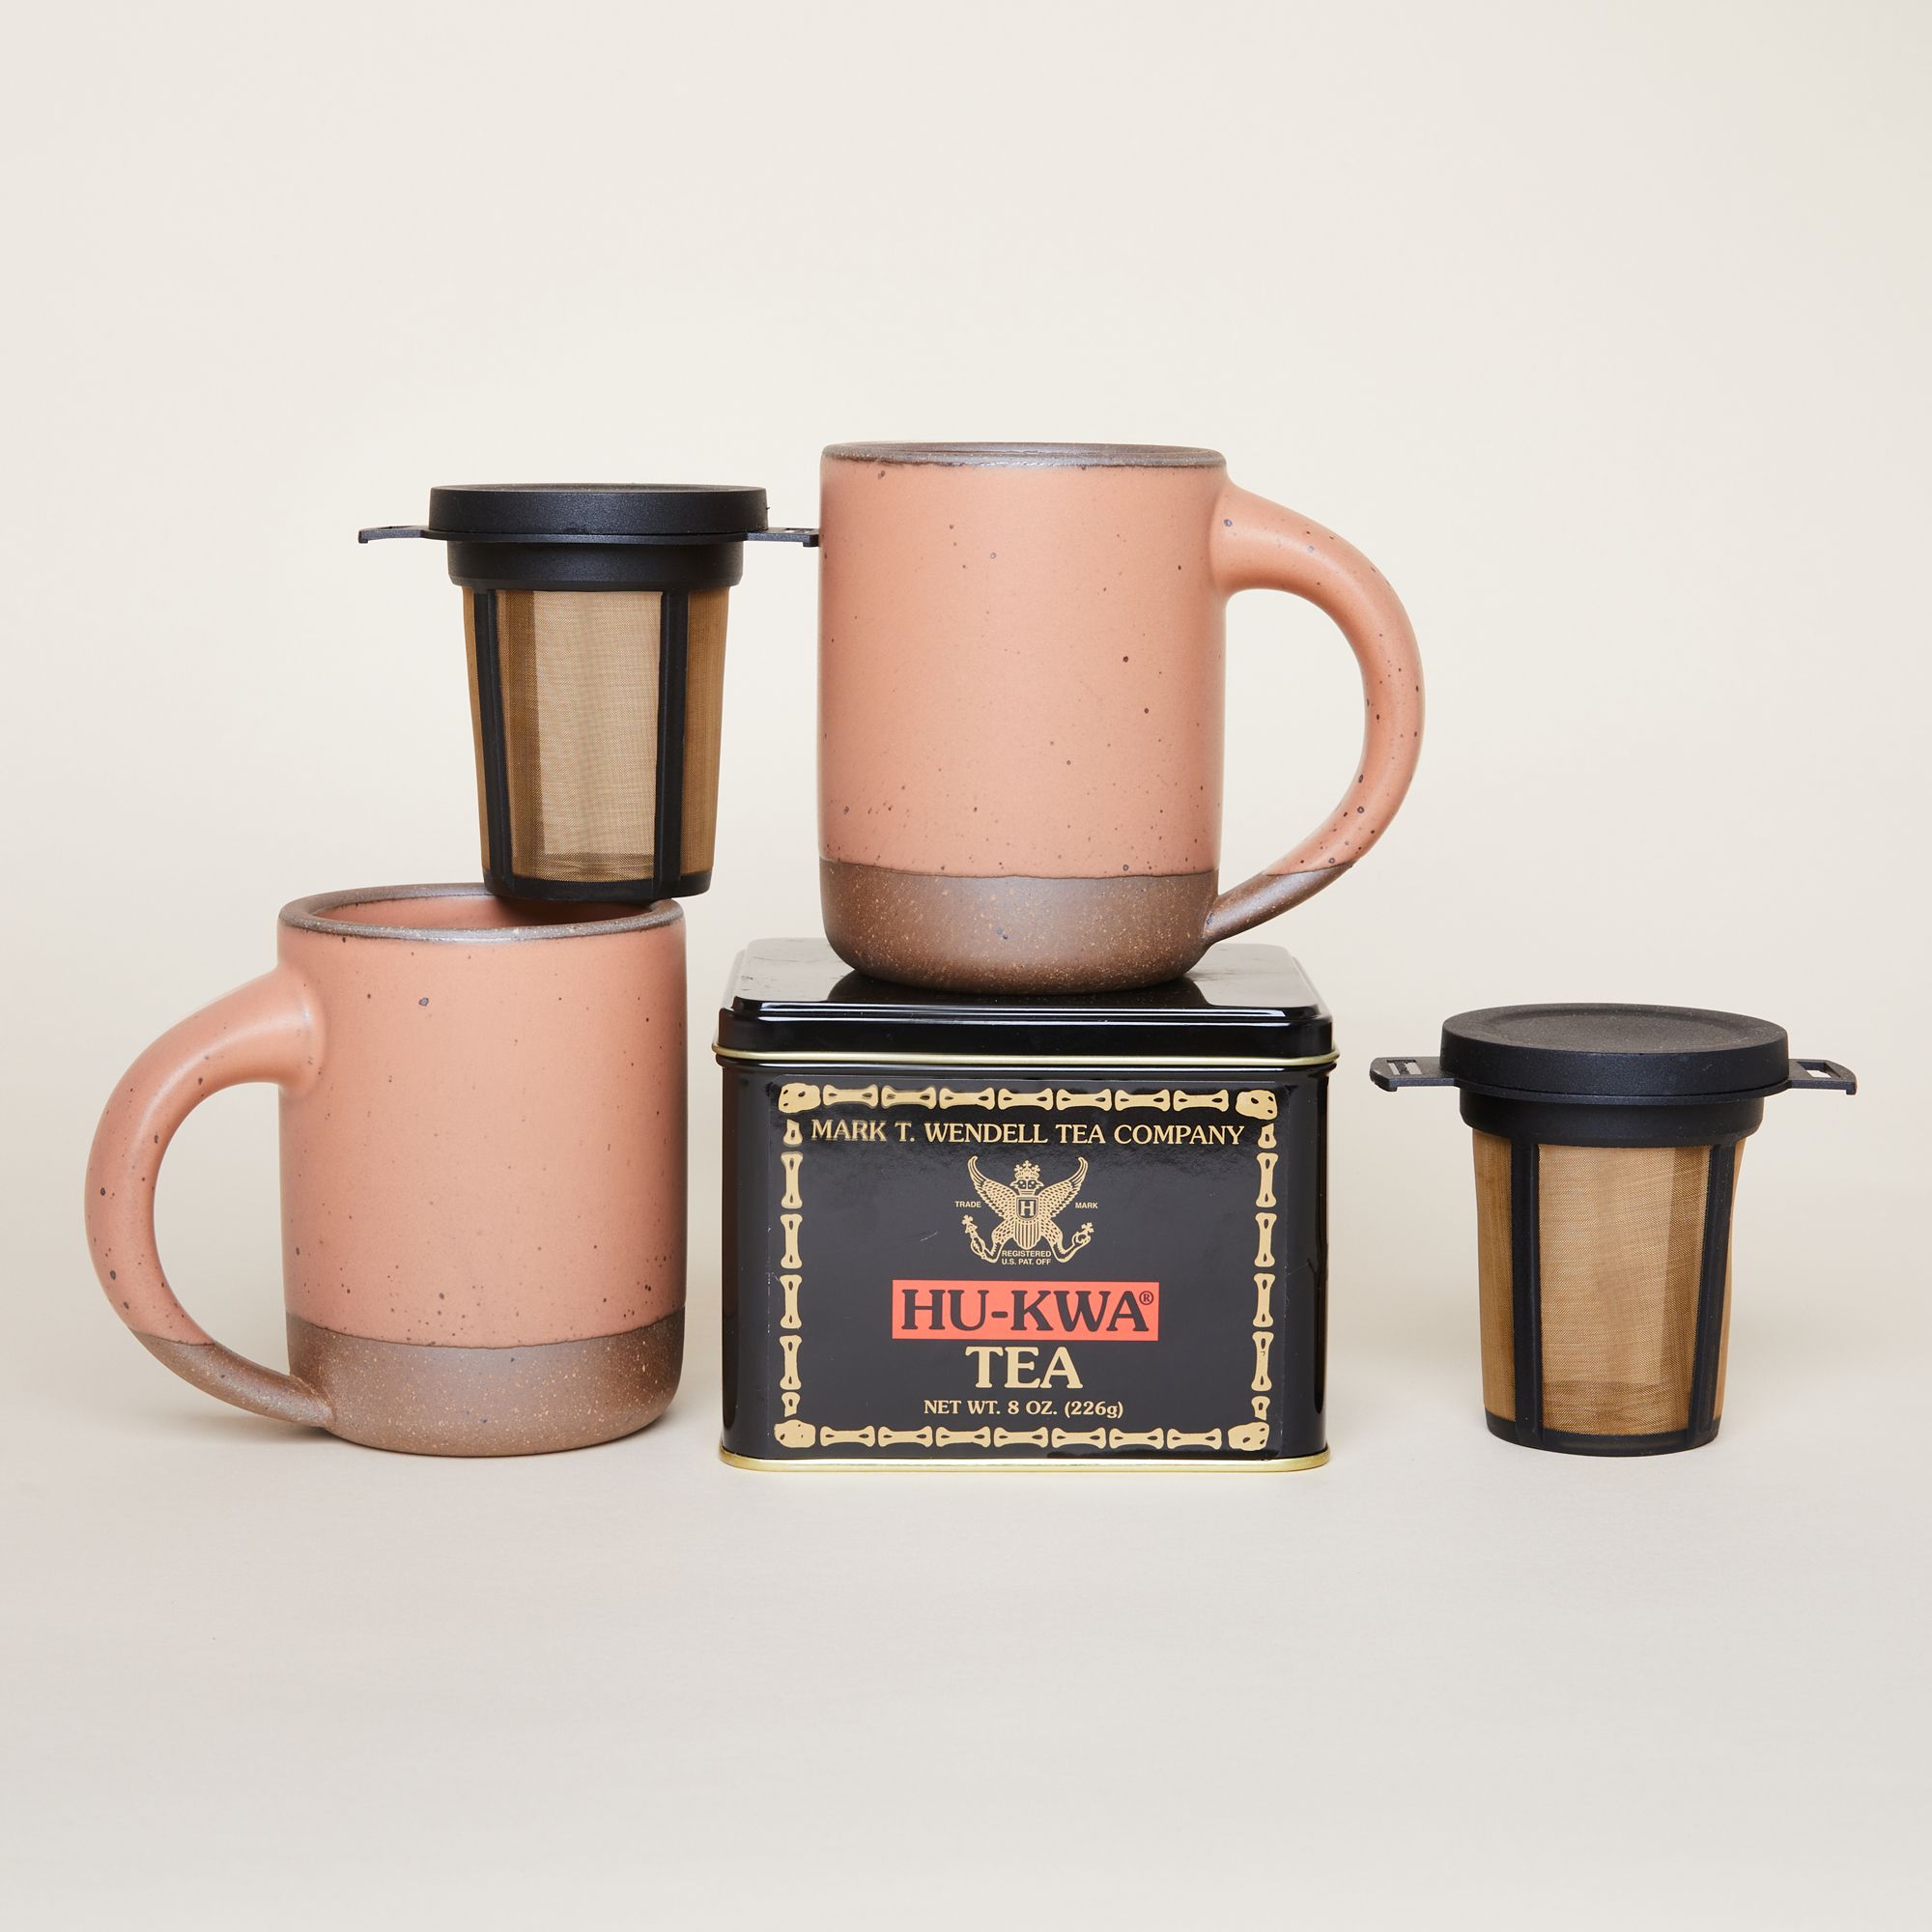 Two East Fork Mugs in Utah, a warm, soft, pinkish orange, sitting next two a black and mesh tea strainer that fits right in a mug and a black box of black tea.